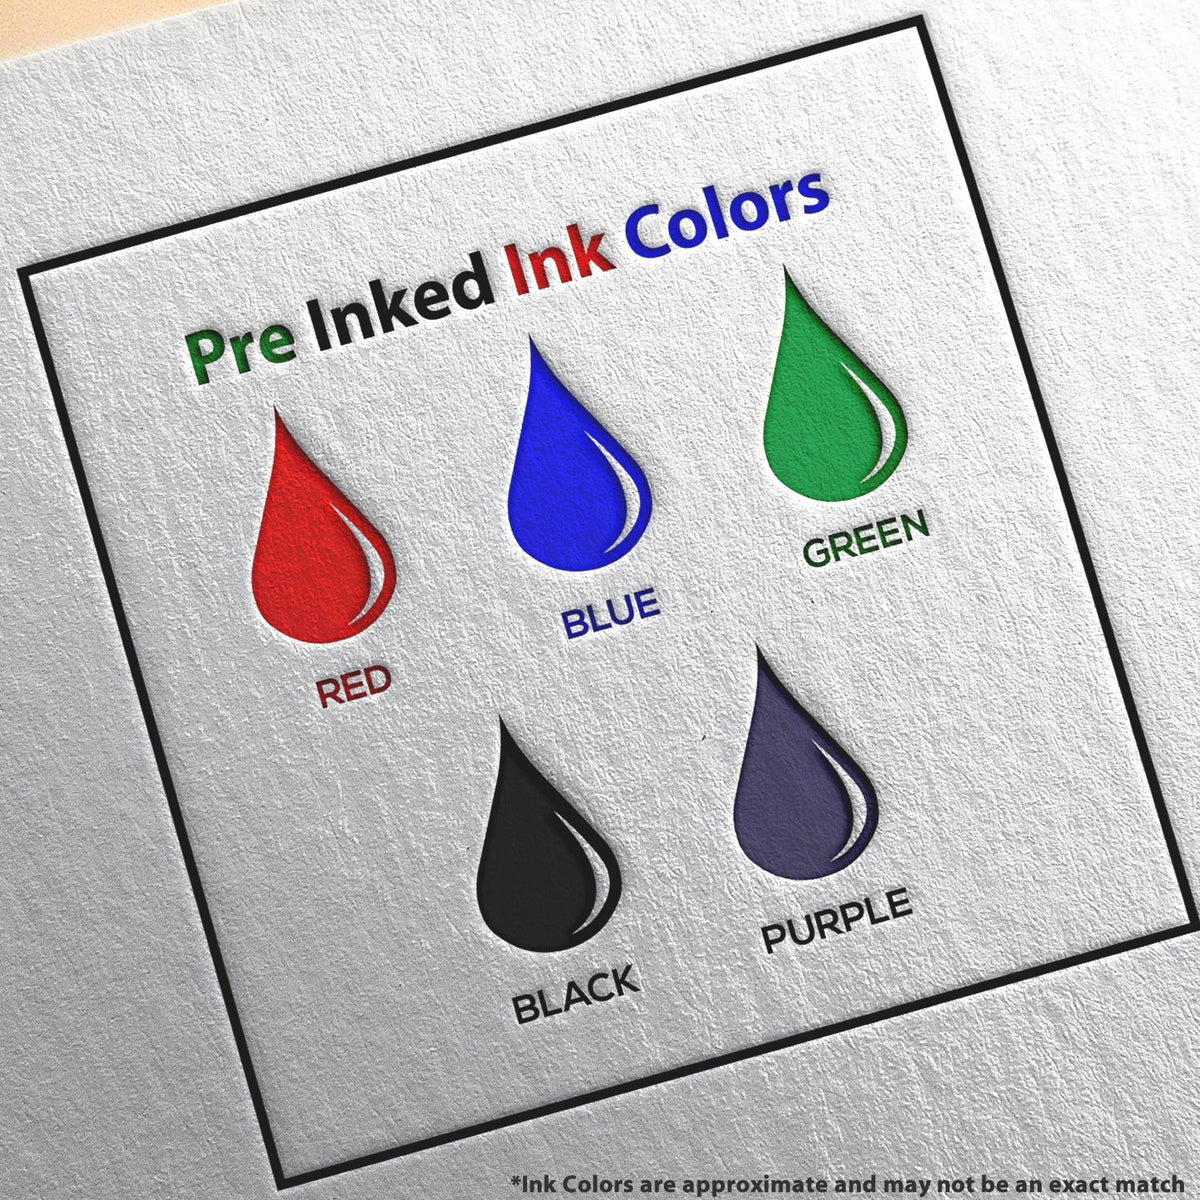 A picture showing the different ink colors or hues available for the Super Slim North Dakota Notary Public Stamp product.